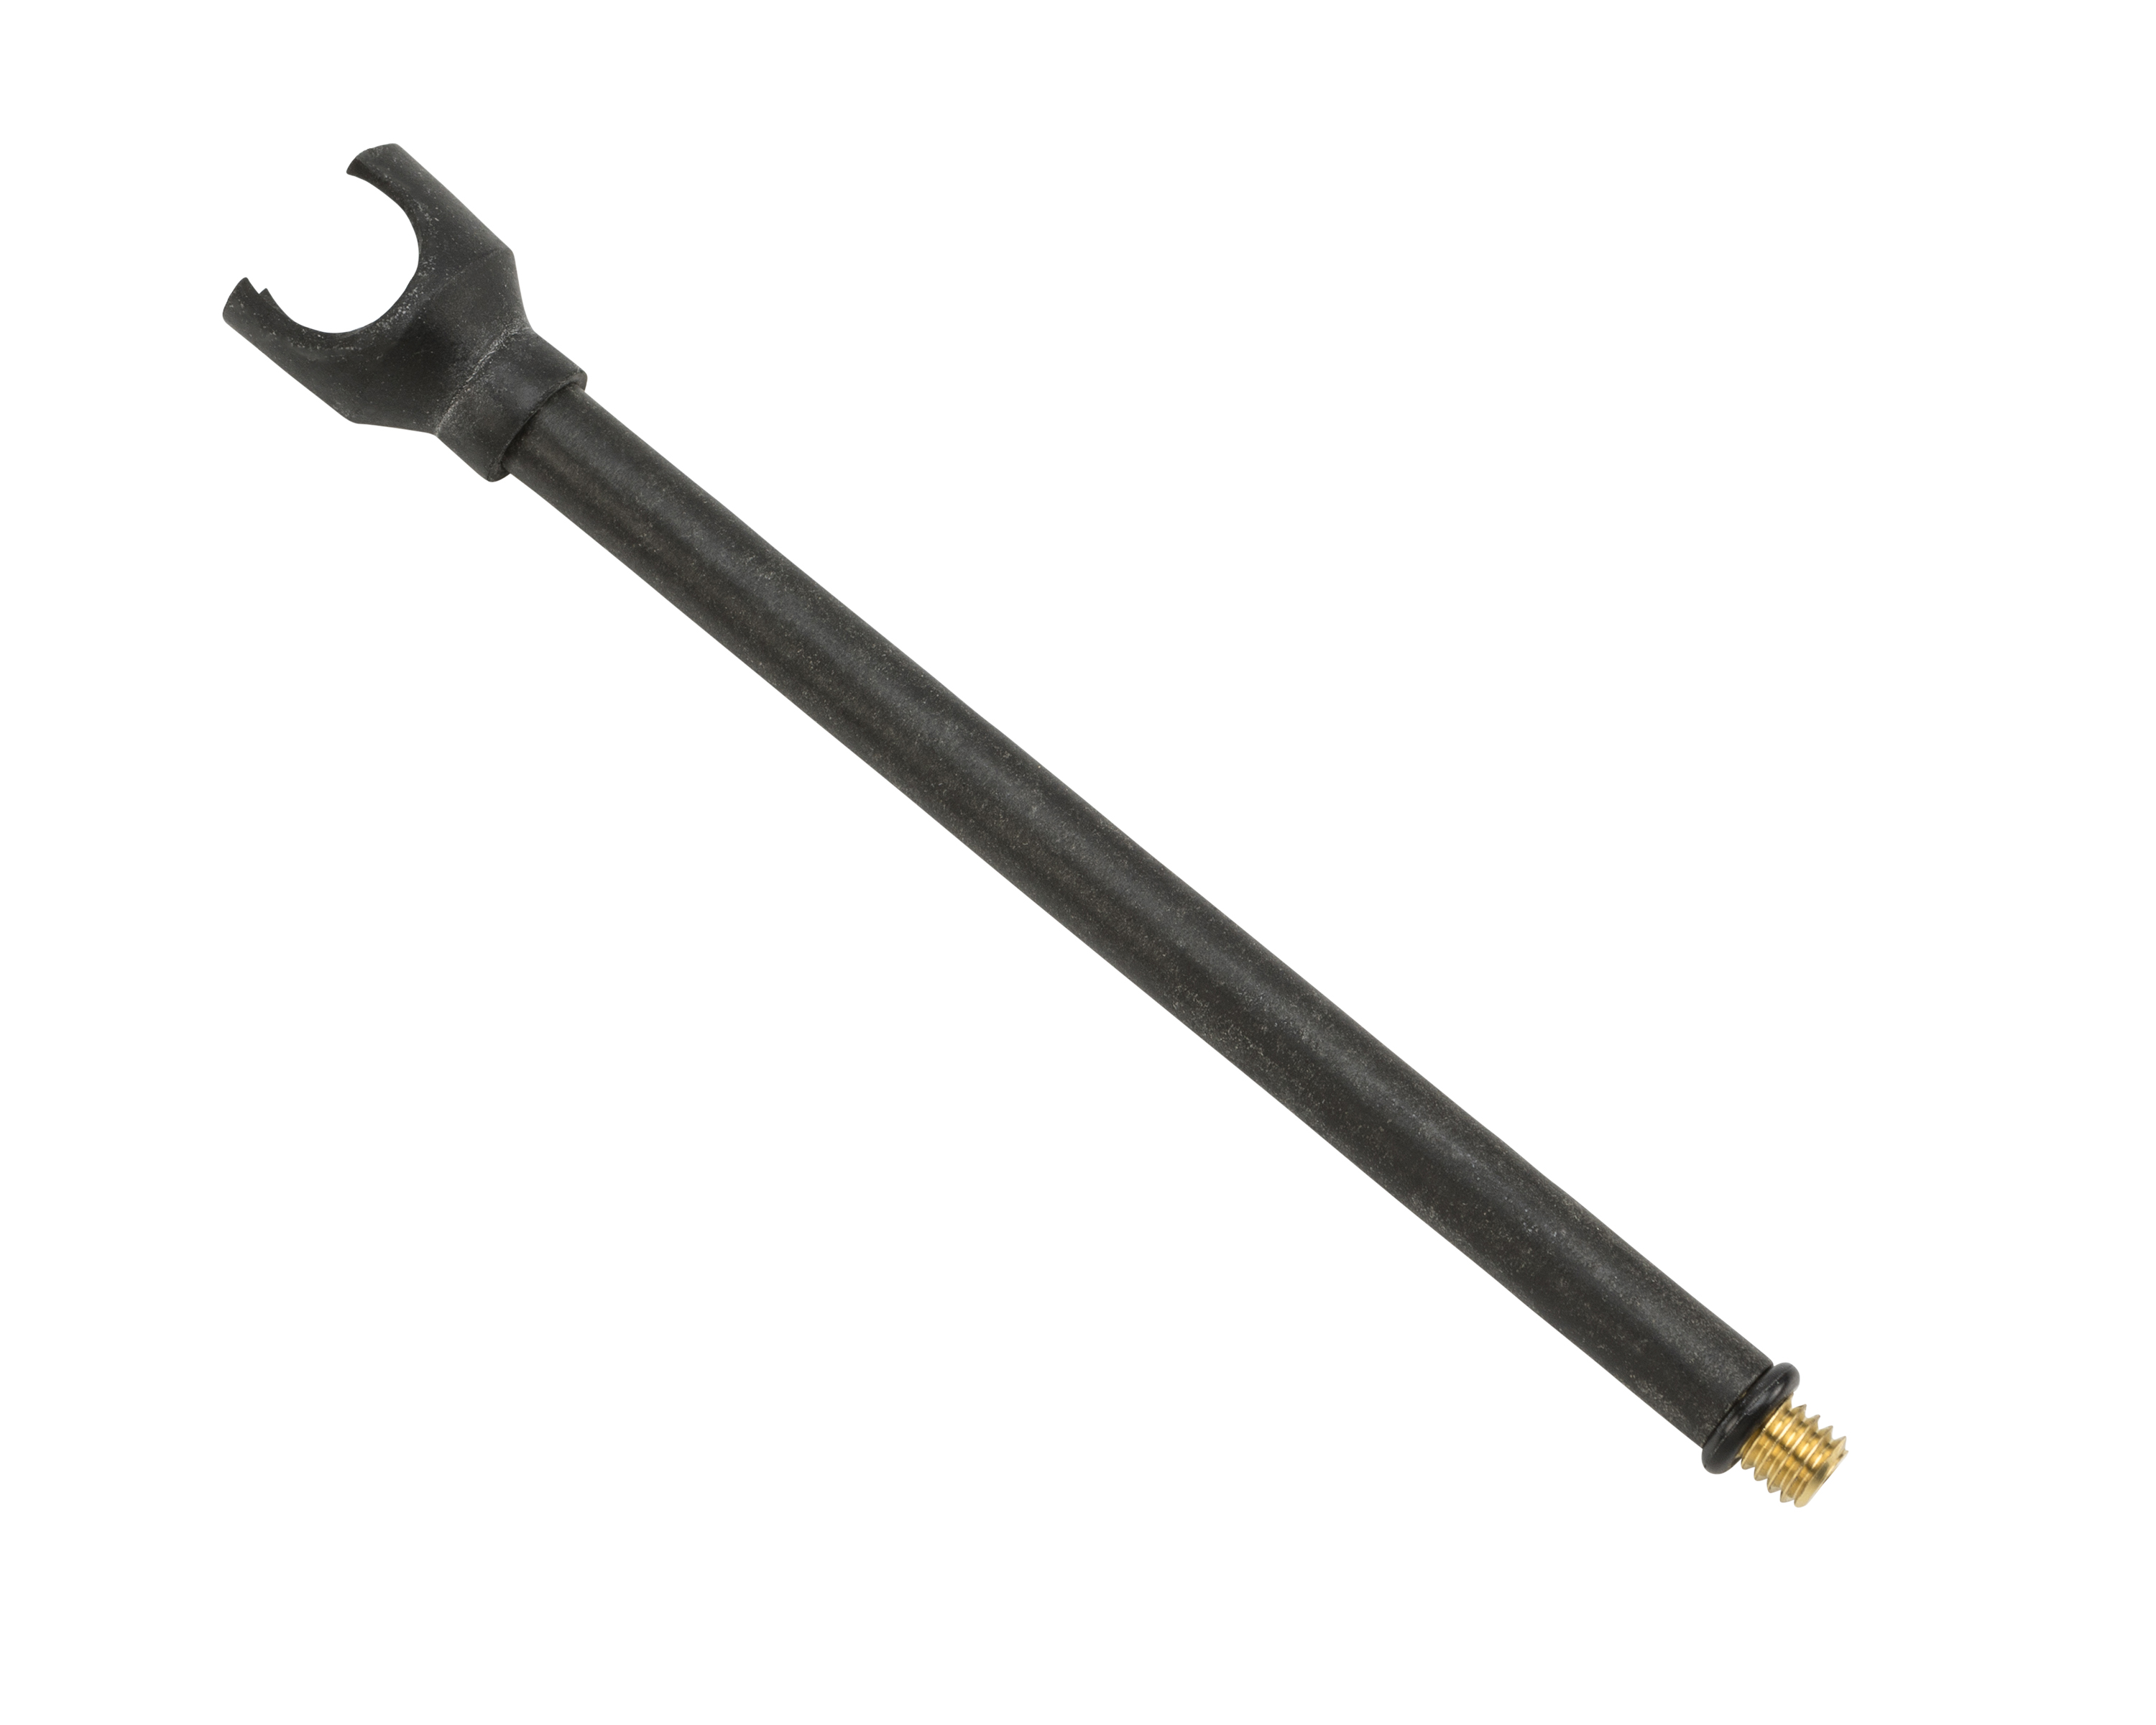 SP-306 Standard Rigid Probe with Rubber Tip